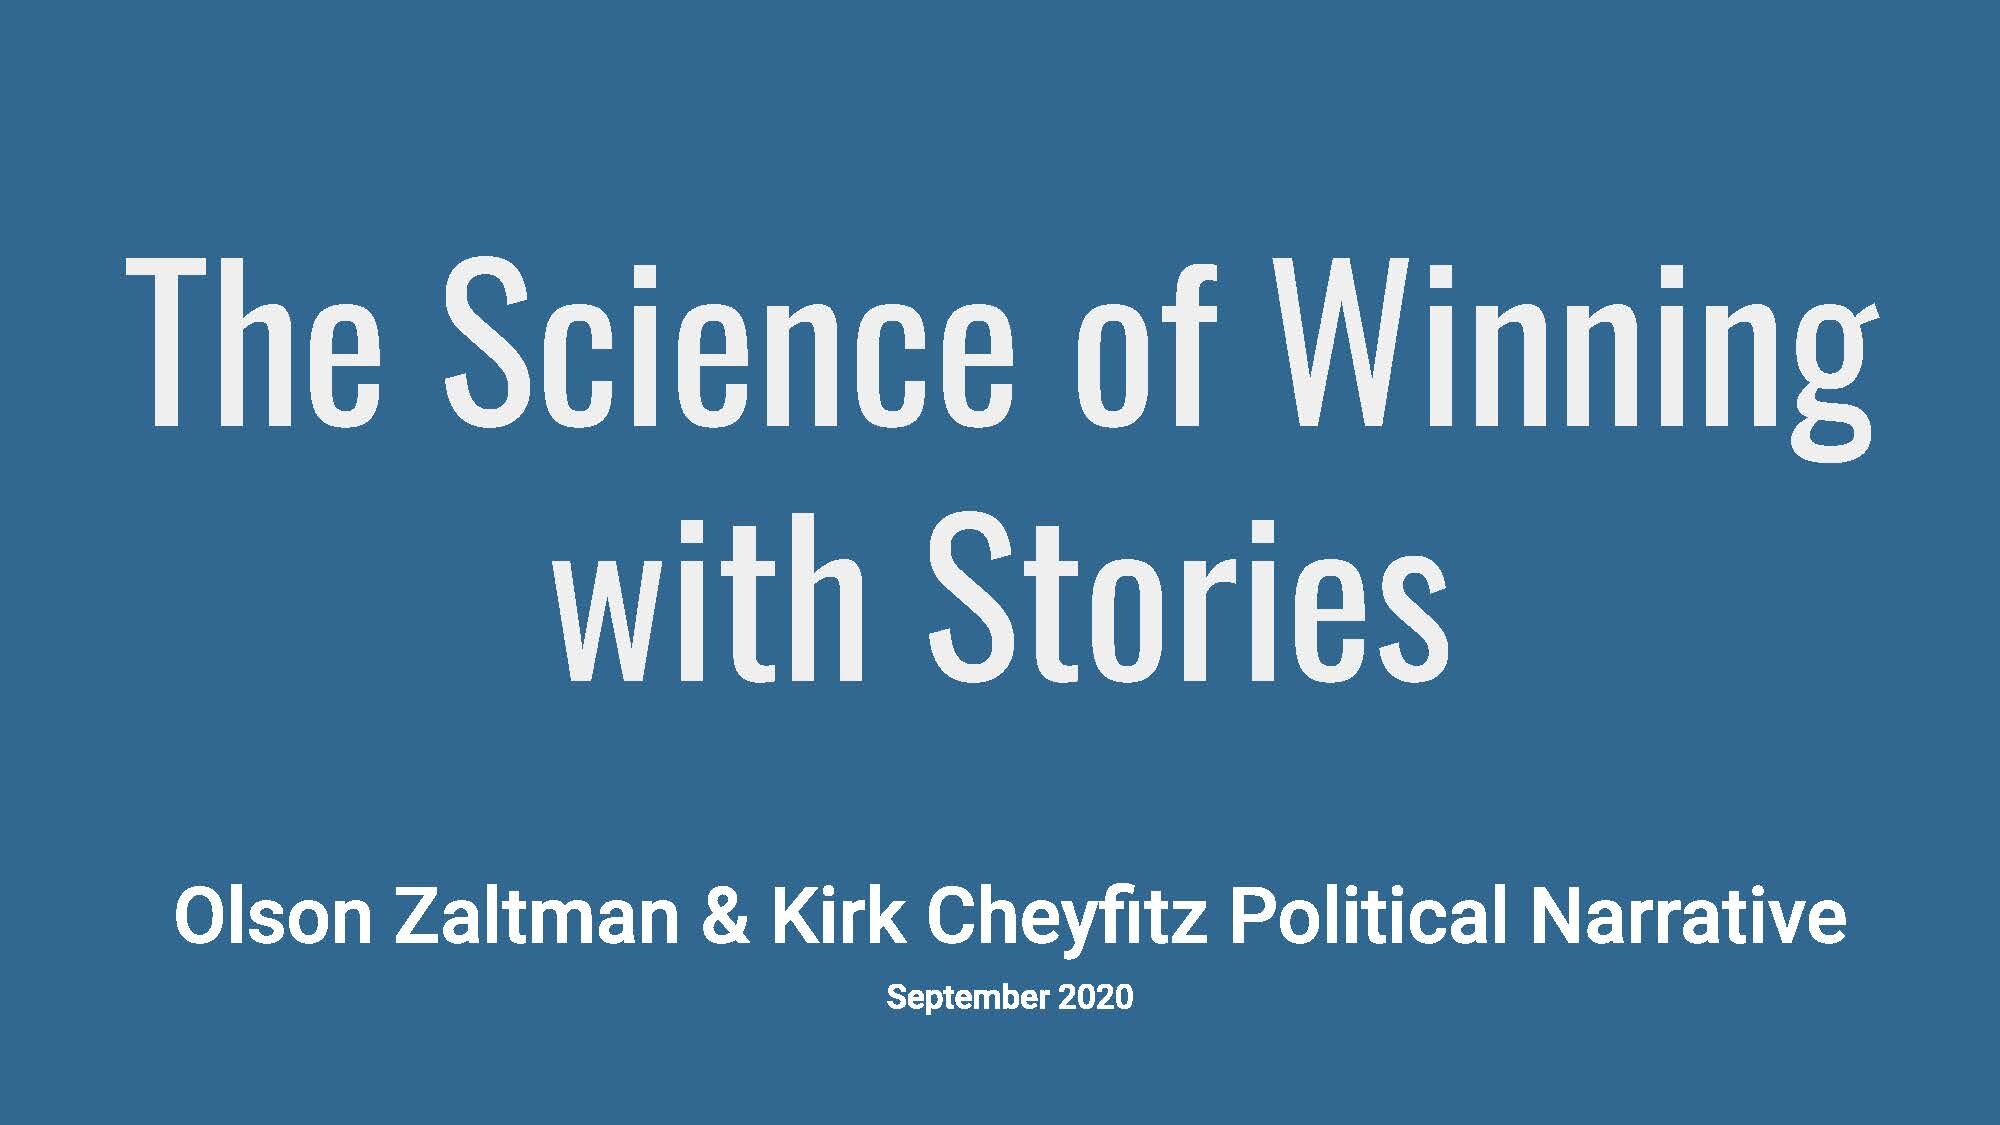 The Science of Winning with Stories - What You Need to Do Now_Page_1.jpg